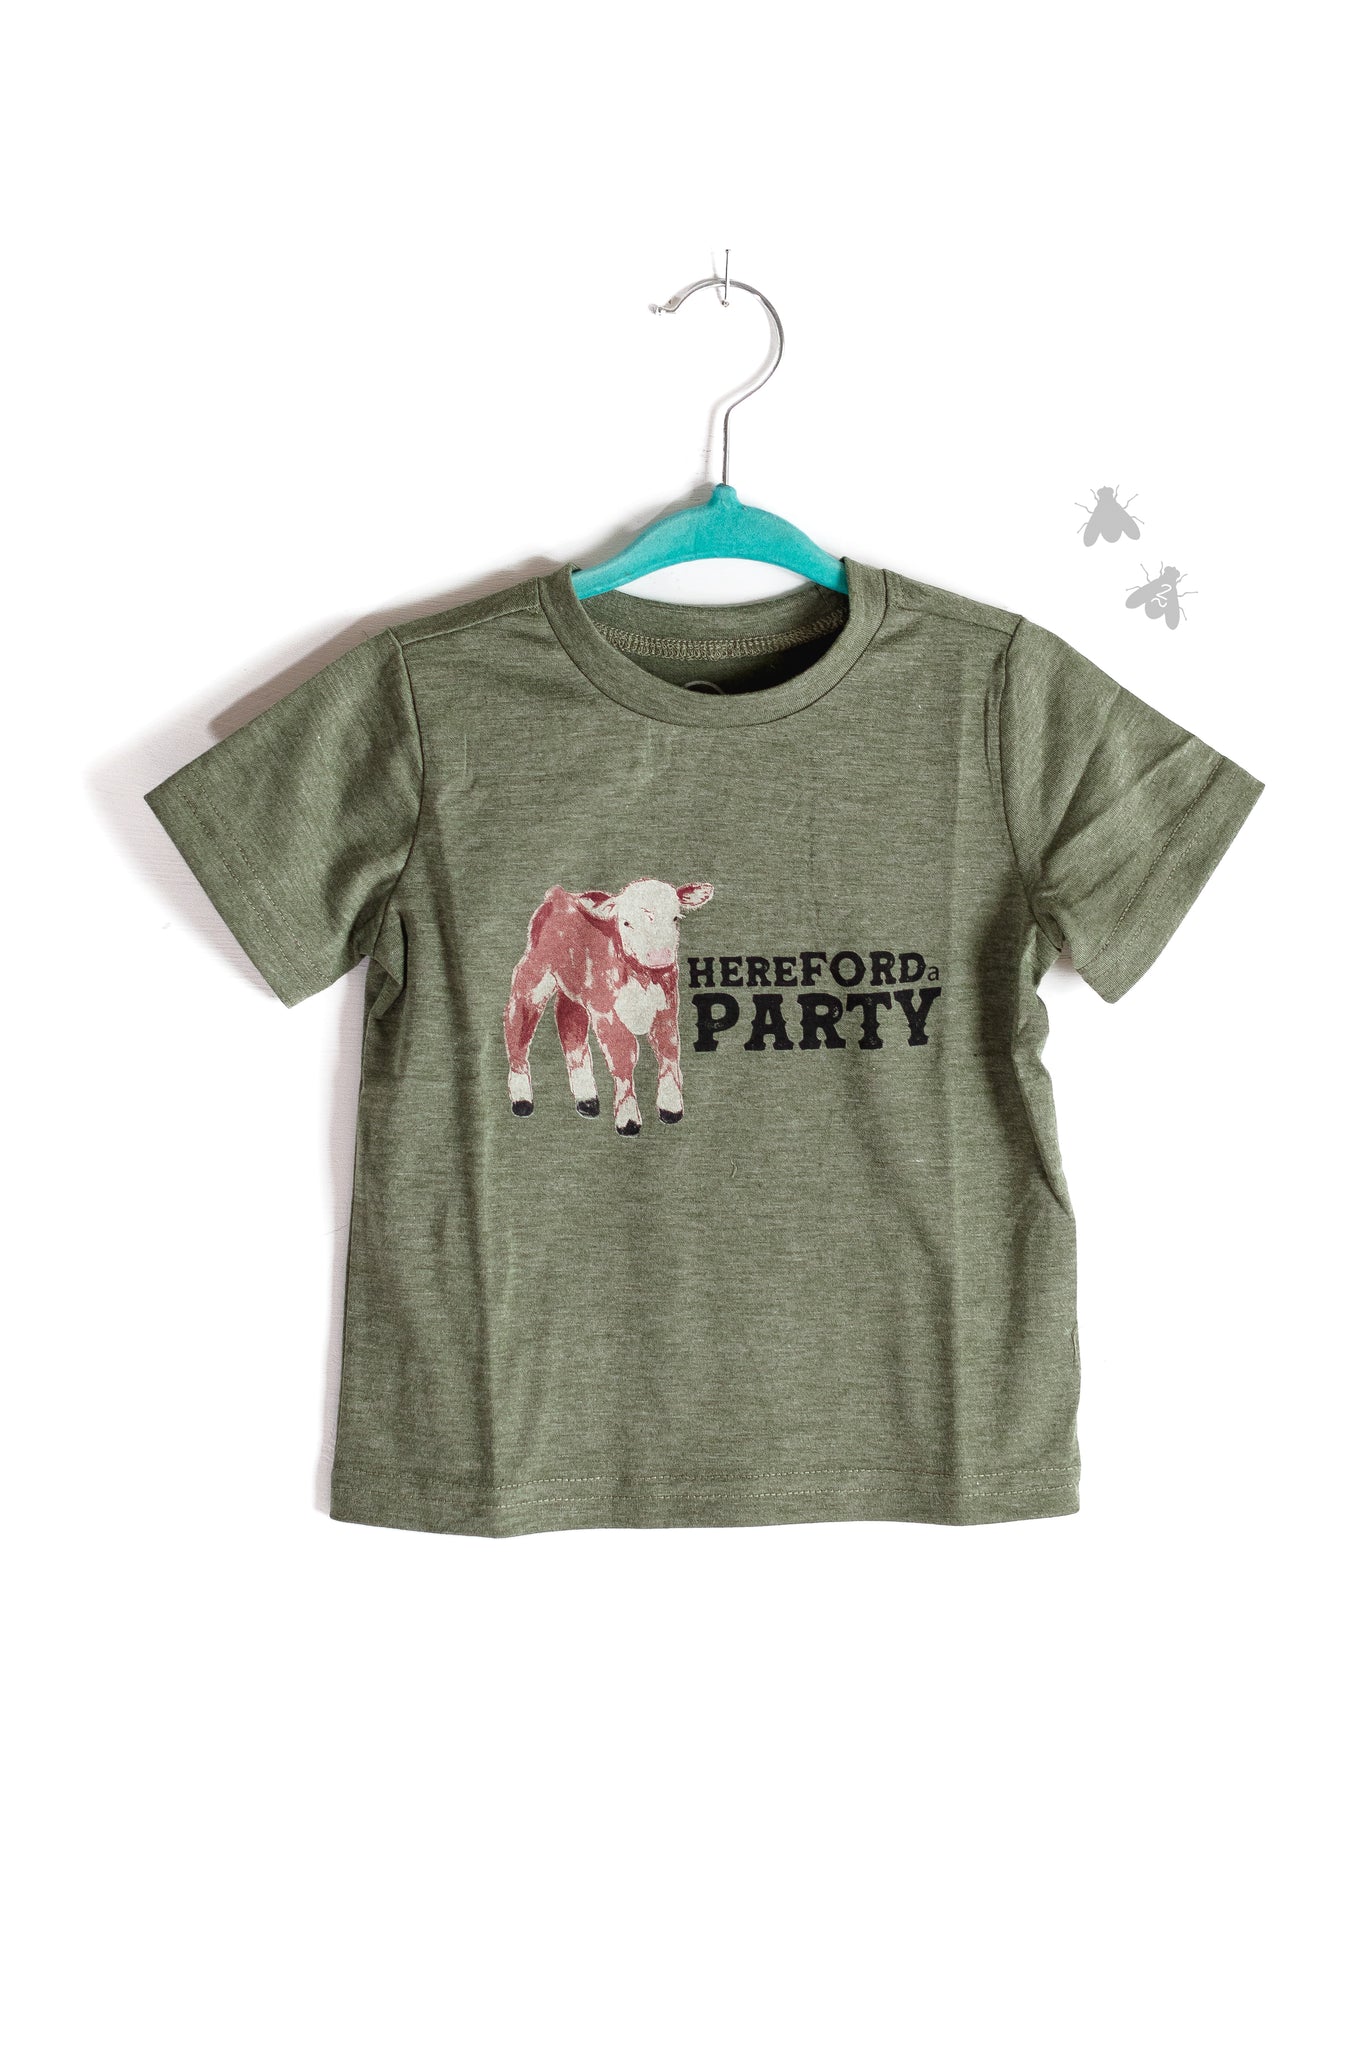 Hereford A Party Tee